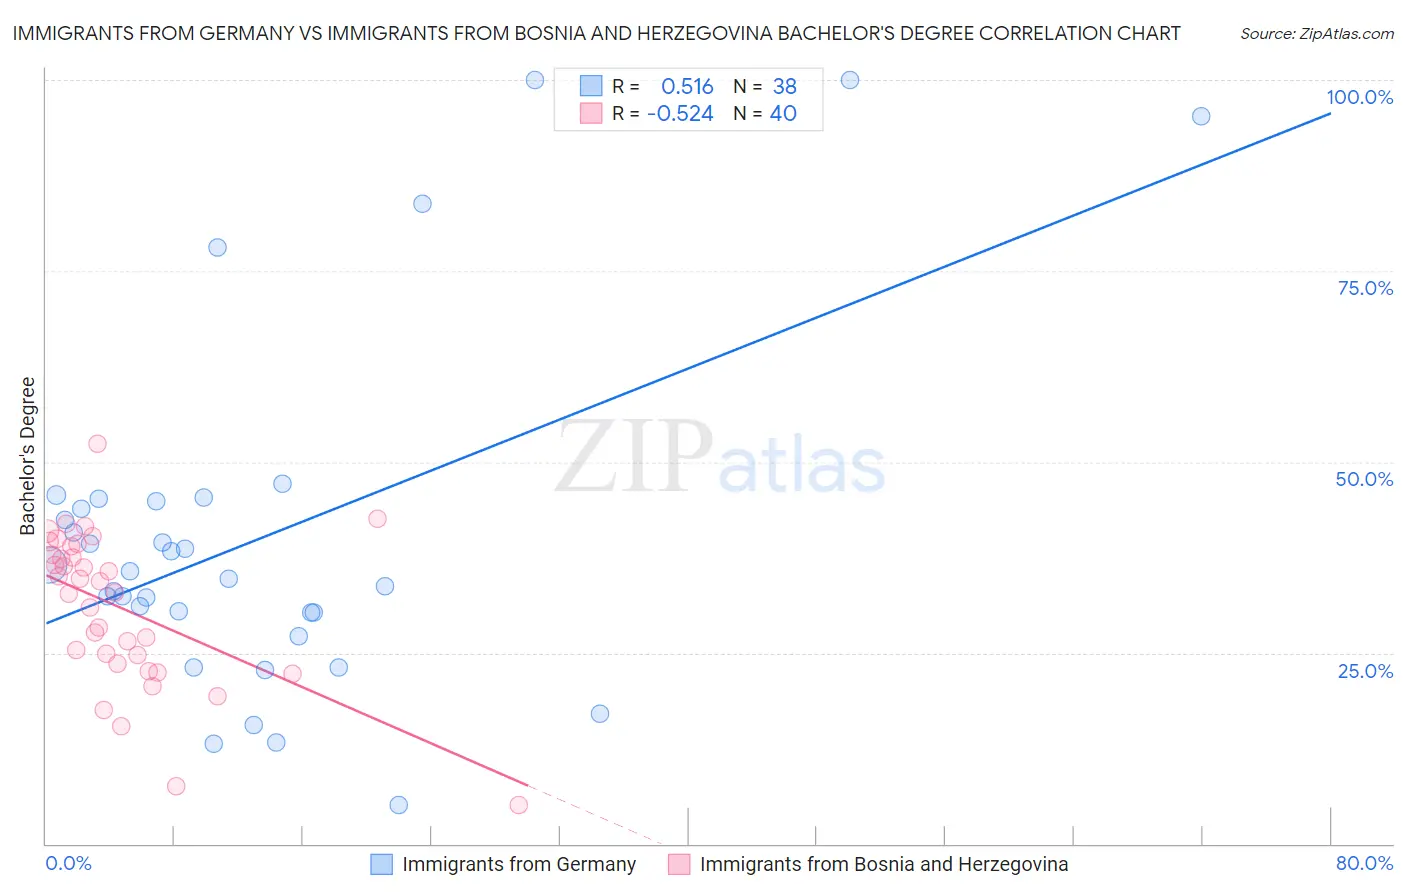 Immigrants from Germany vs Immigrants from Bosnia and Herzegovina Bachelor's Degree